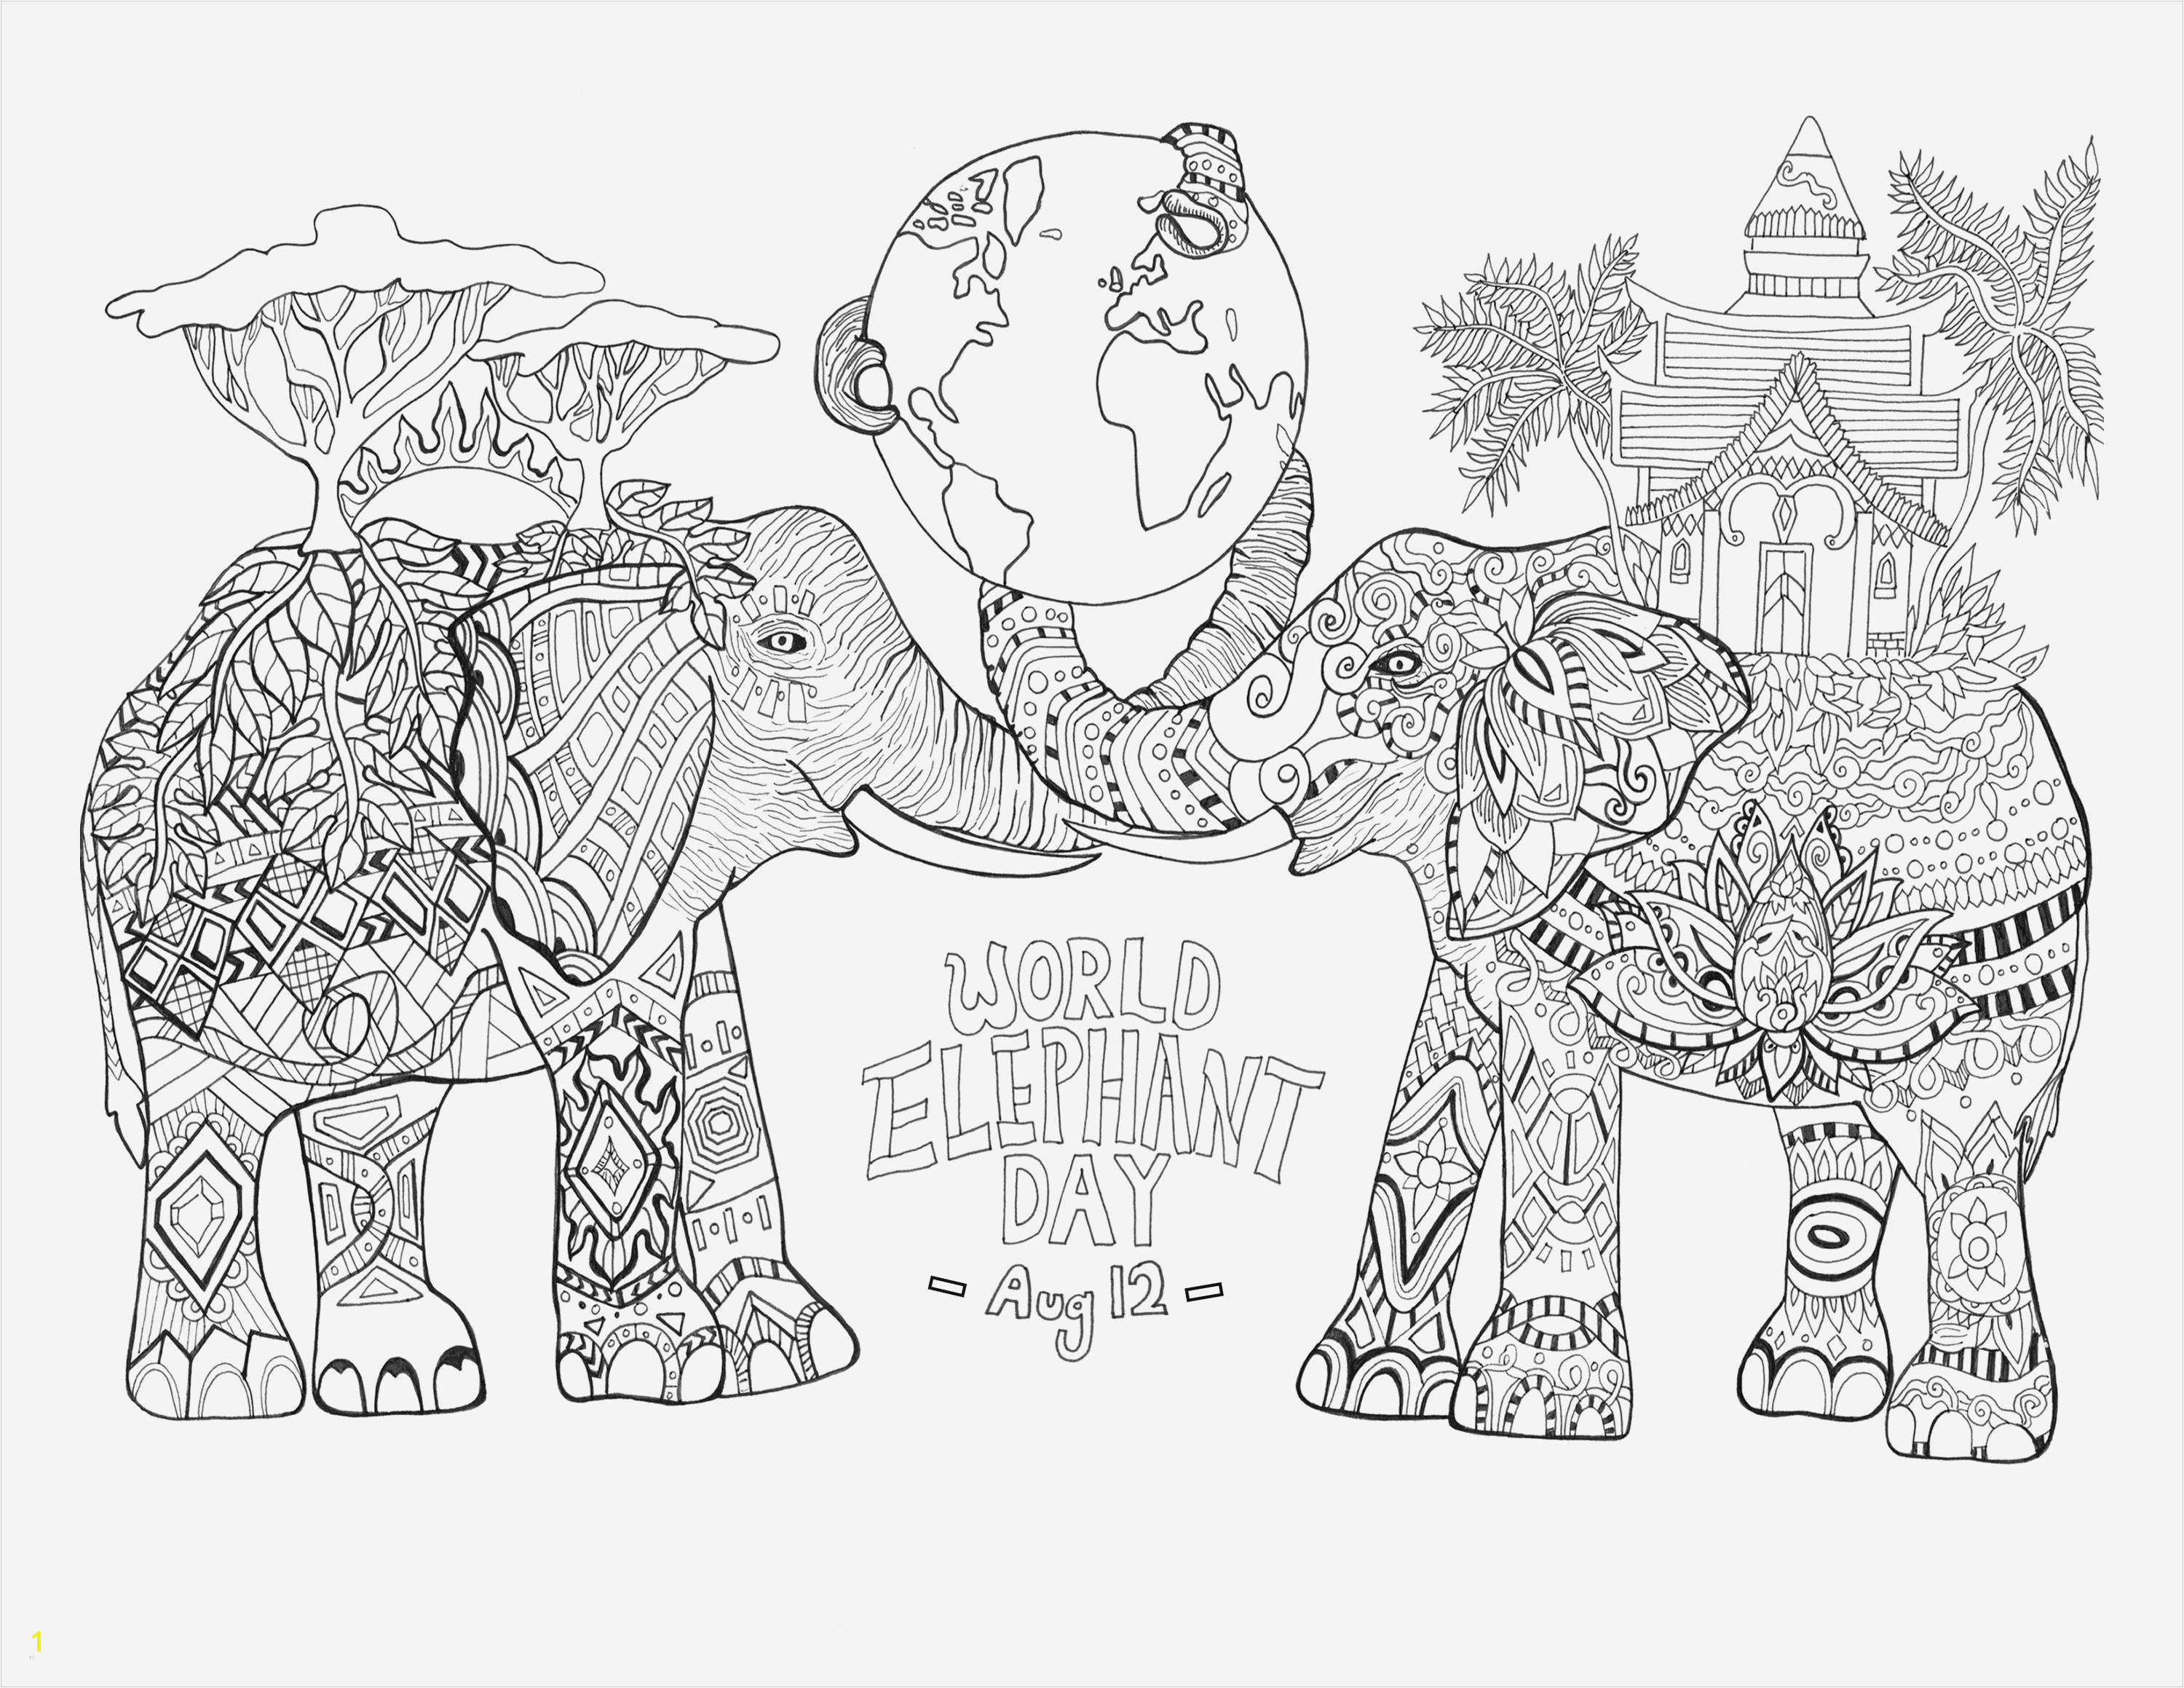 Free Coloring Pages Lego Printable Appealing Elephant Coloring Pages Nice Best Od Dog Coloring Pages Free